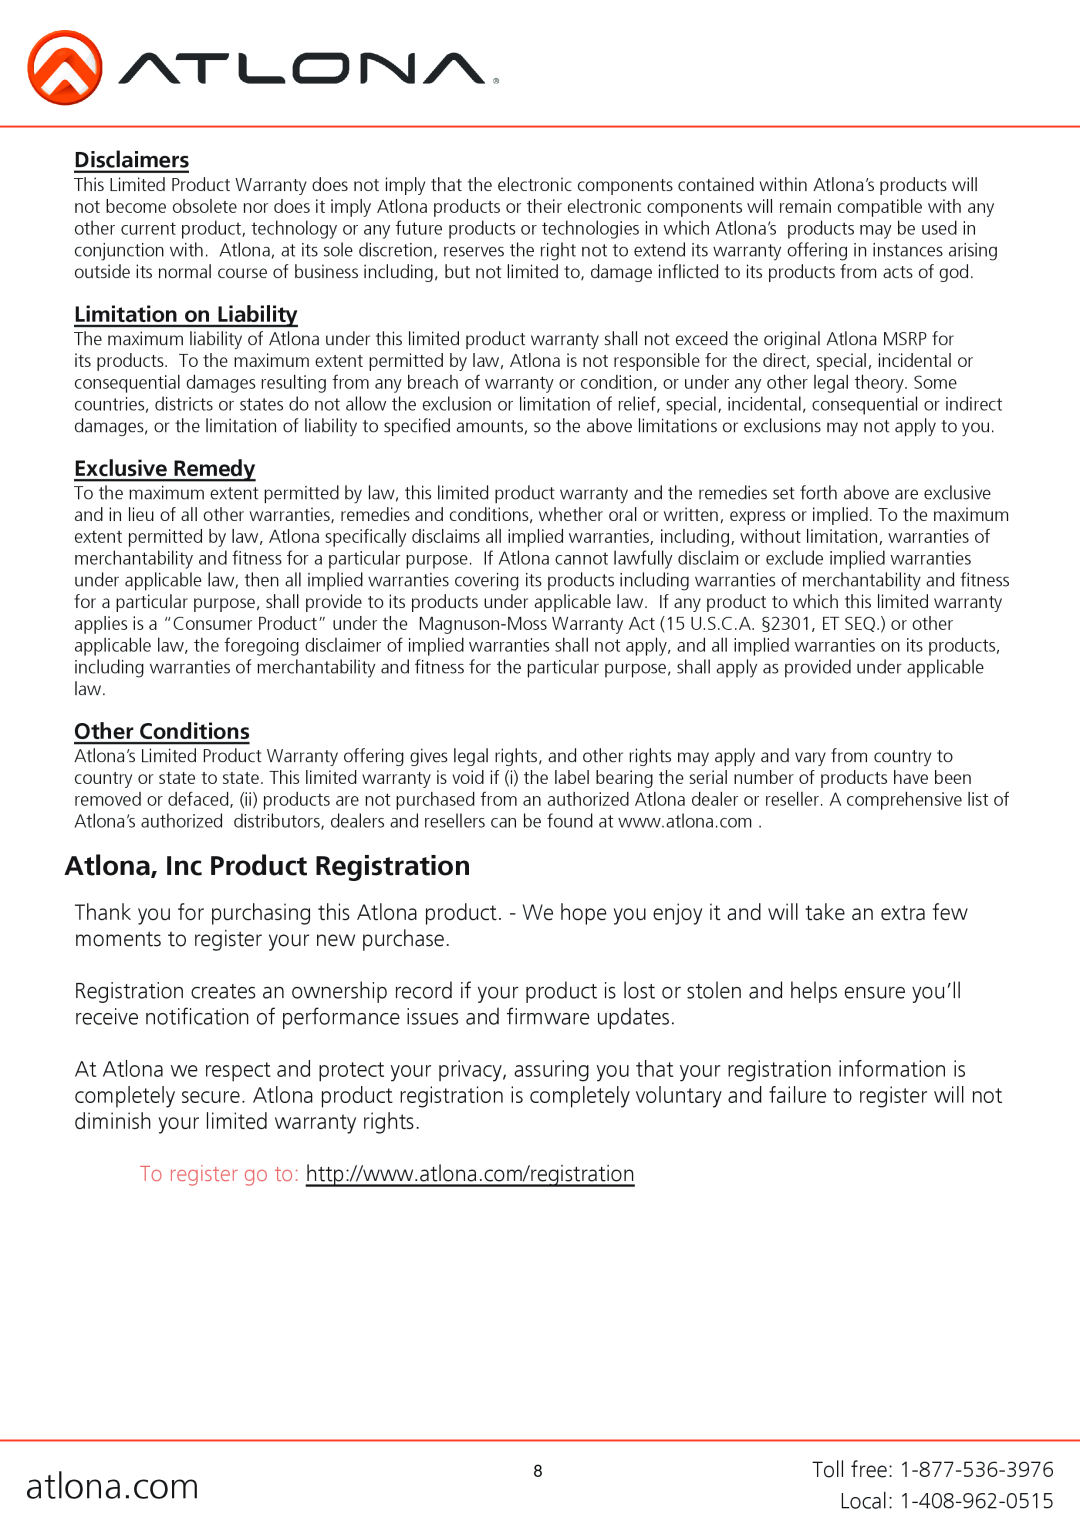 Atlona AT-HD610 Atlona, Inc Product Registration, Disclaimers, Limitation on Liability, Exclusive Remedy, Other Conditions 